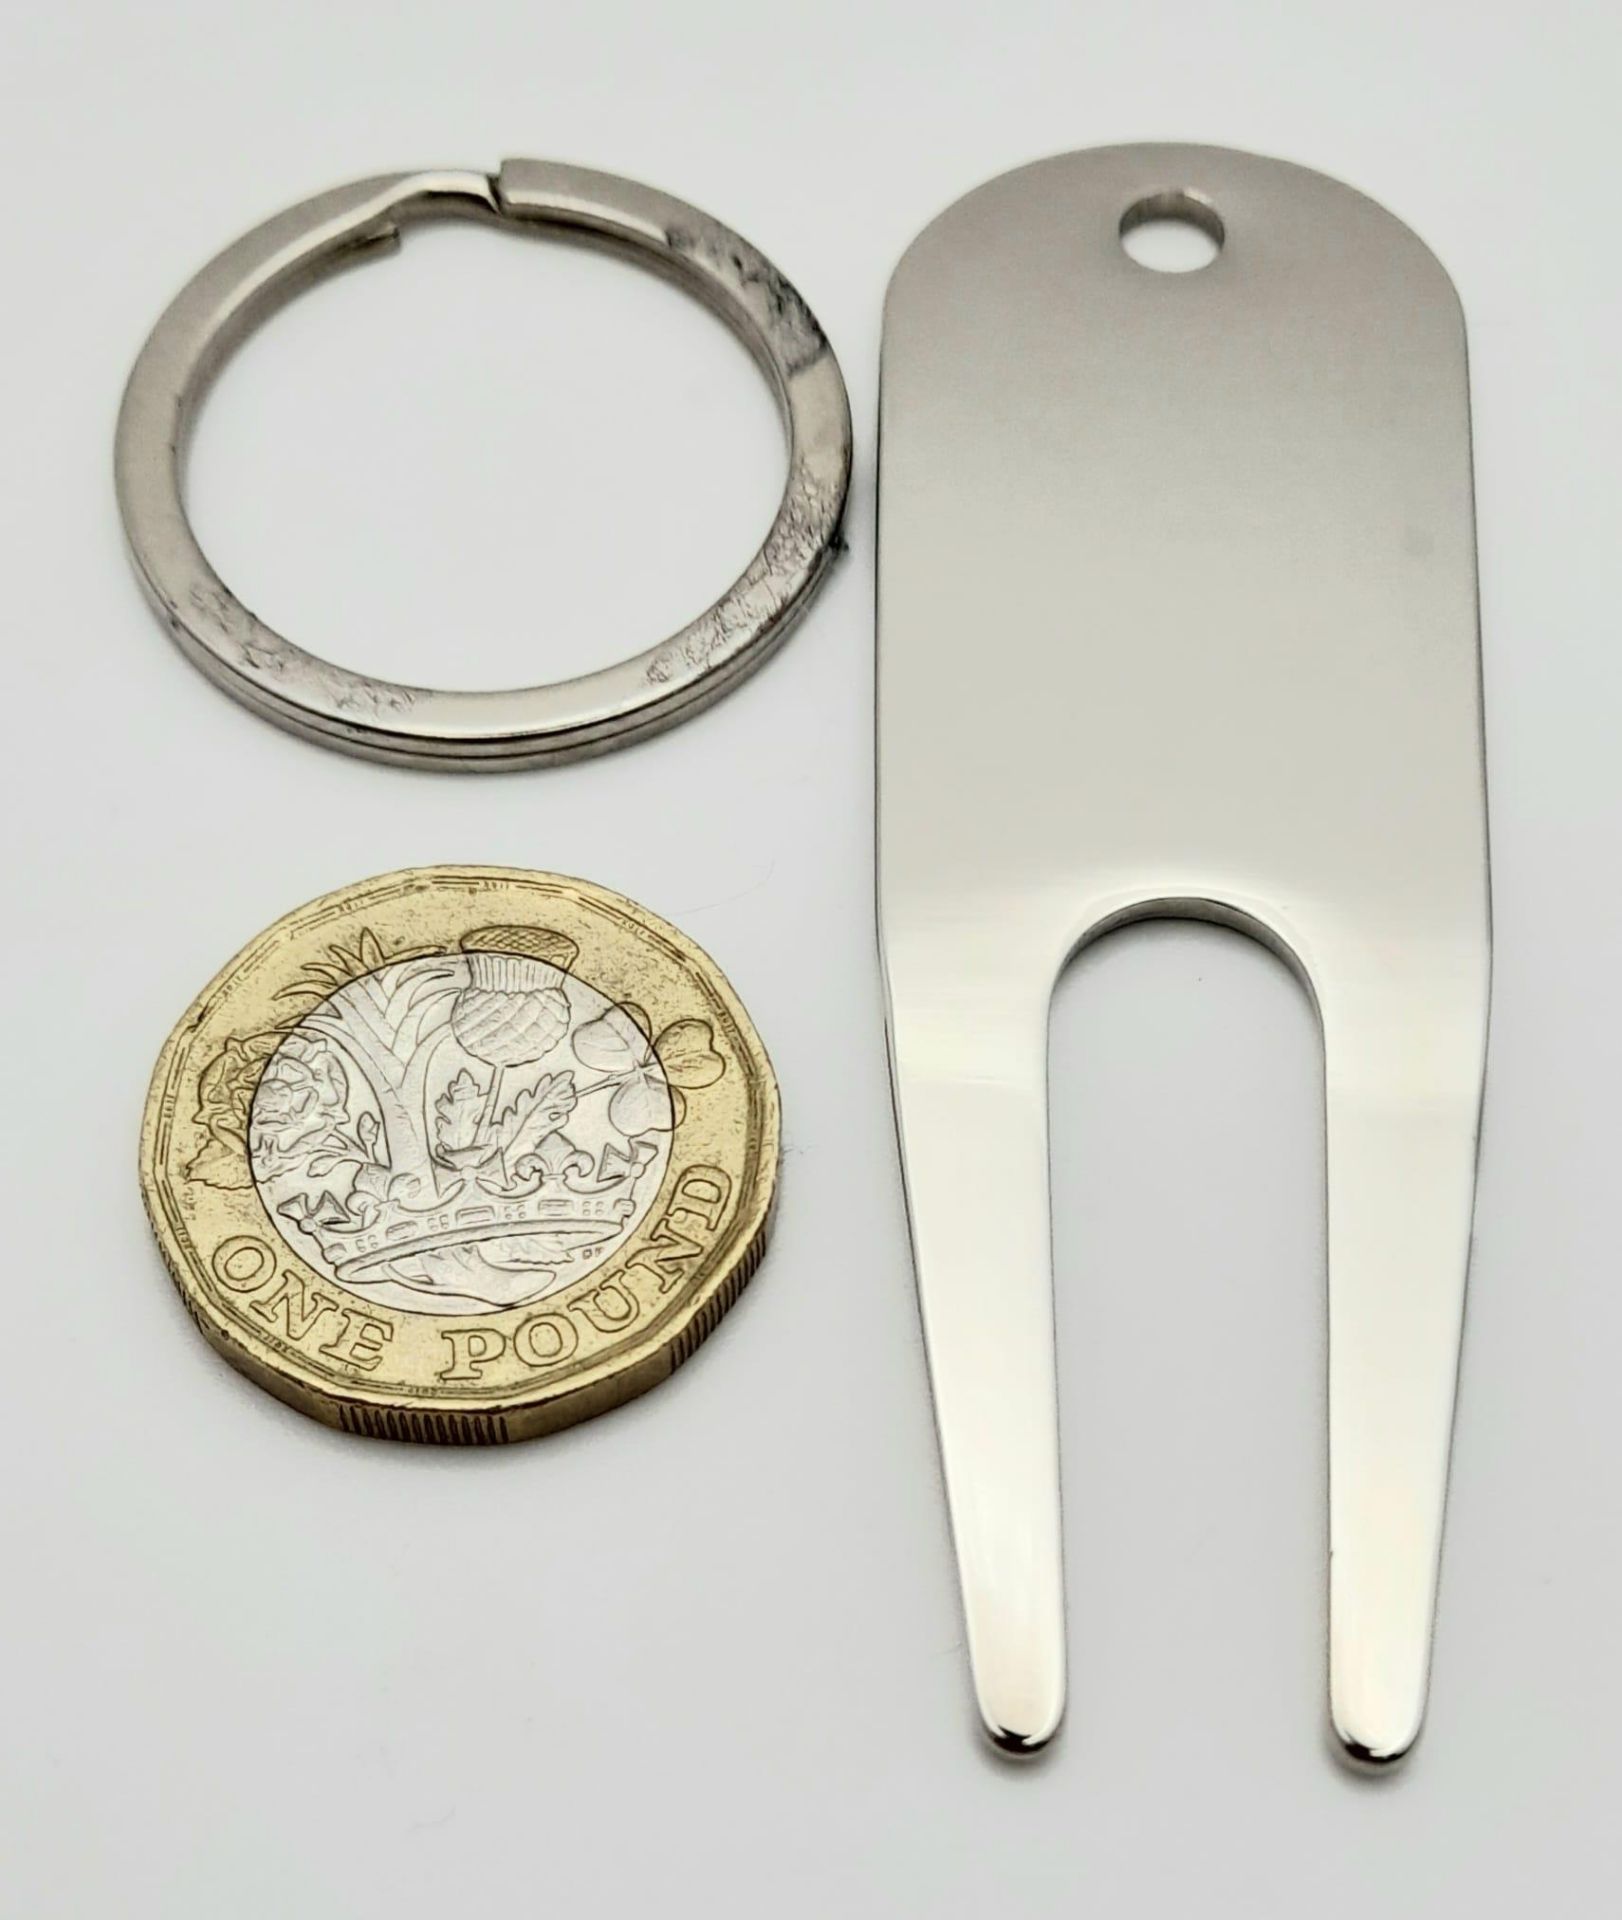 A Rolex Branded Putting Green Divot Repair Tool. Comes with a keyring attachment. In as new - Bild 3 aus 3